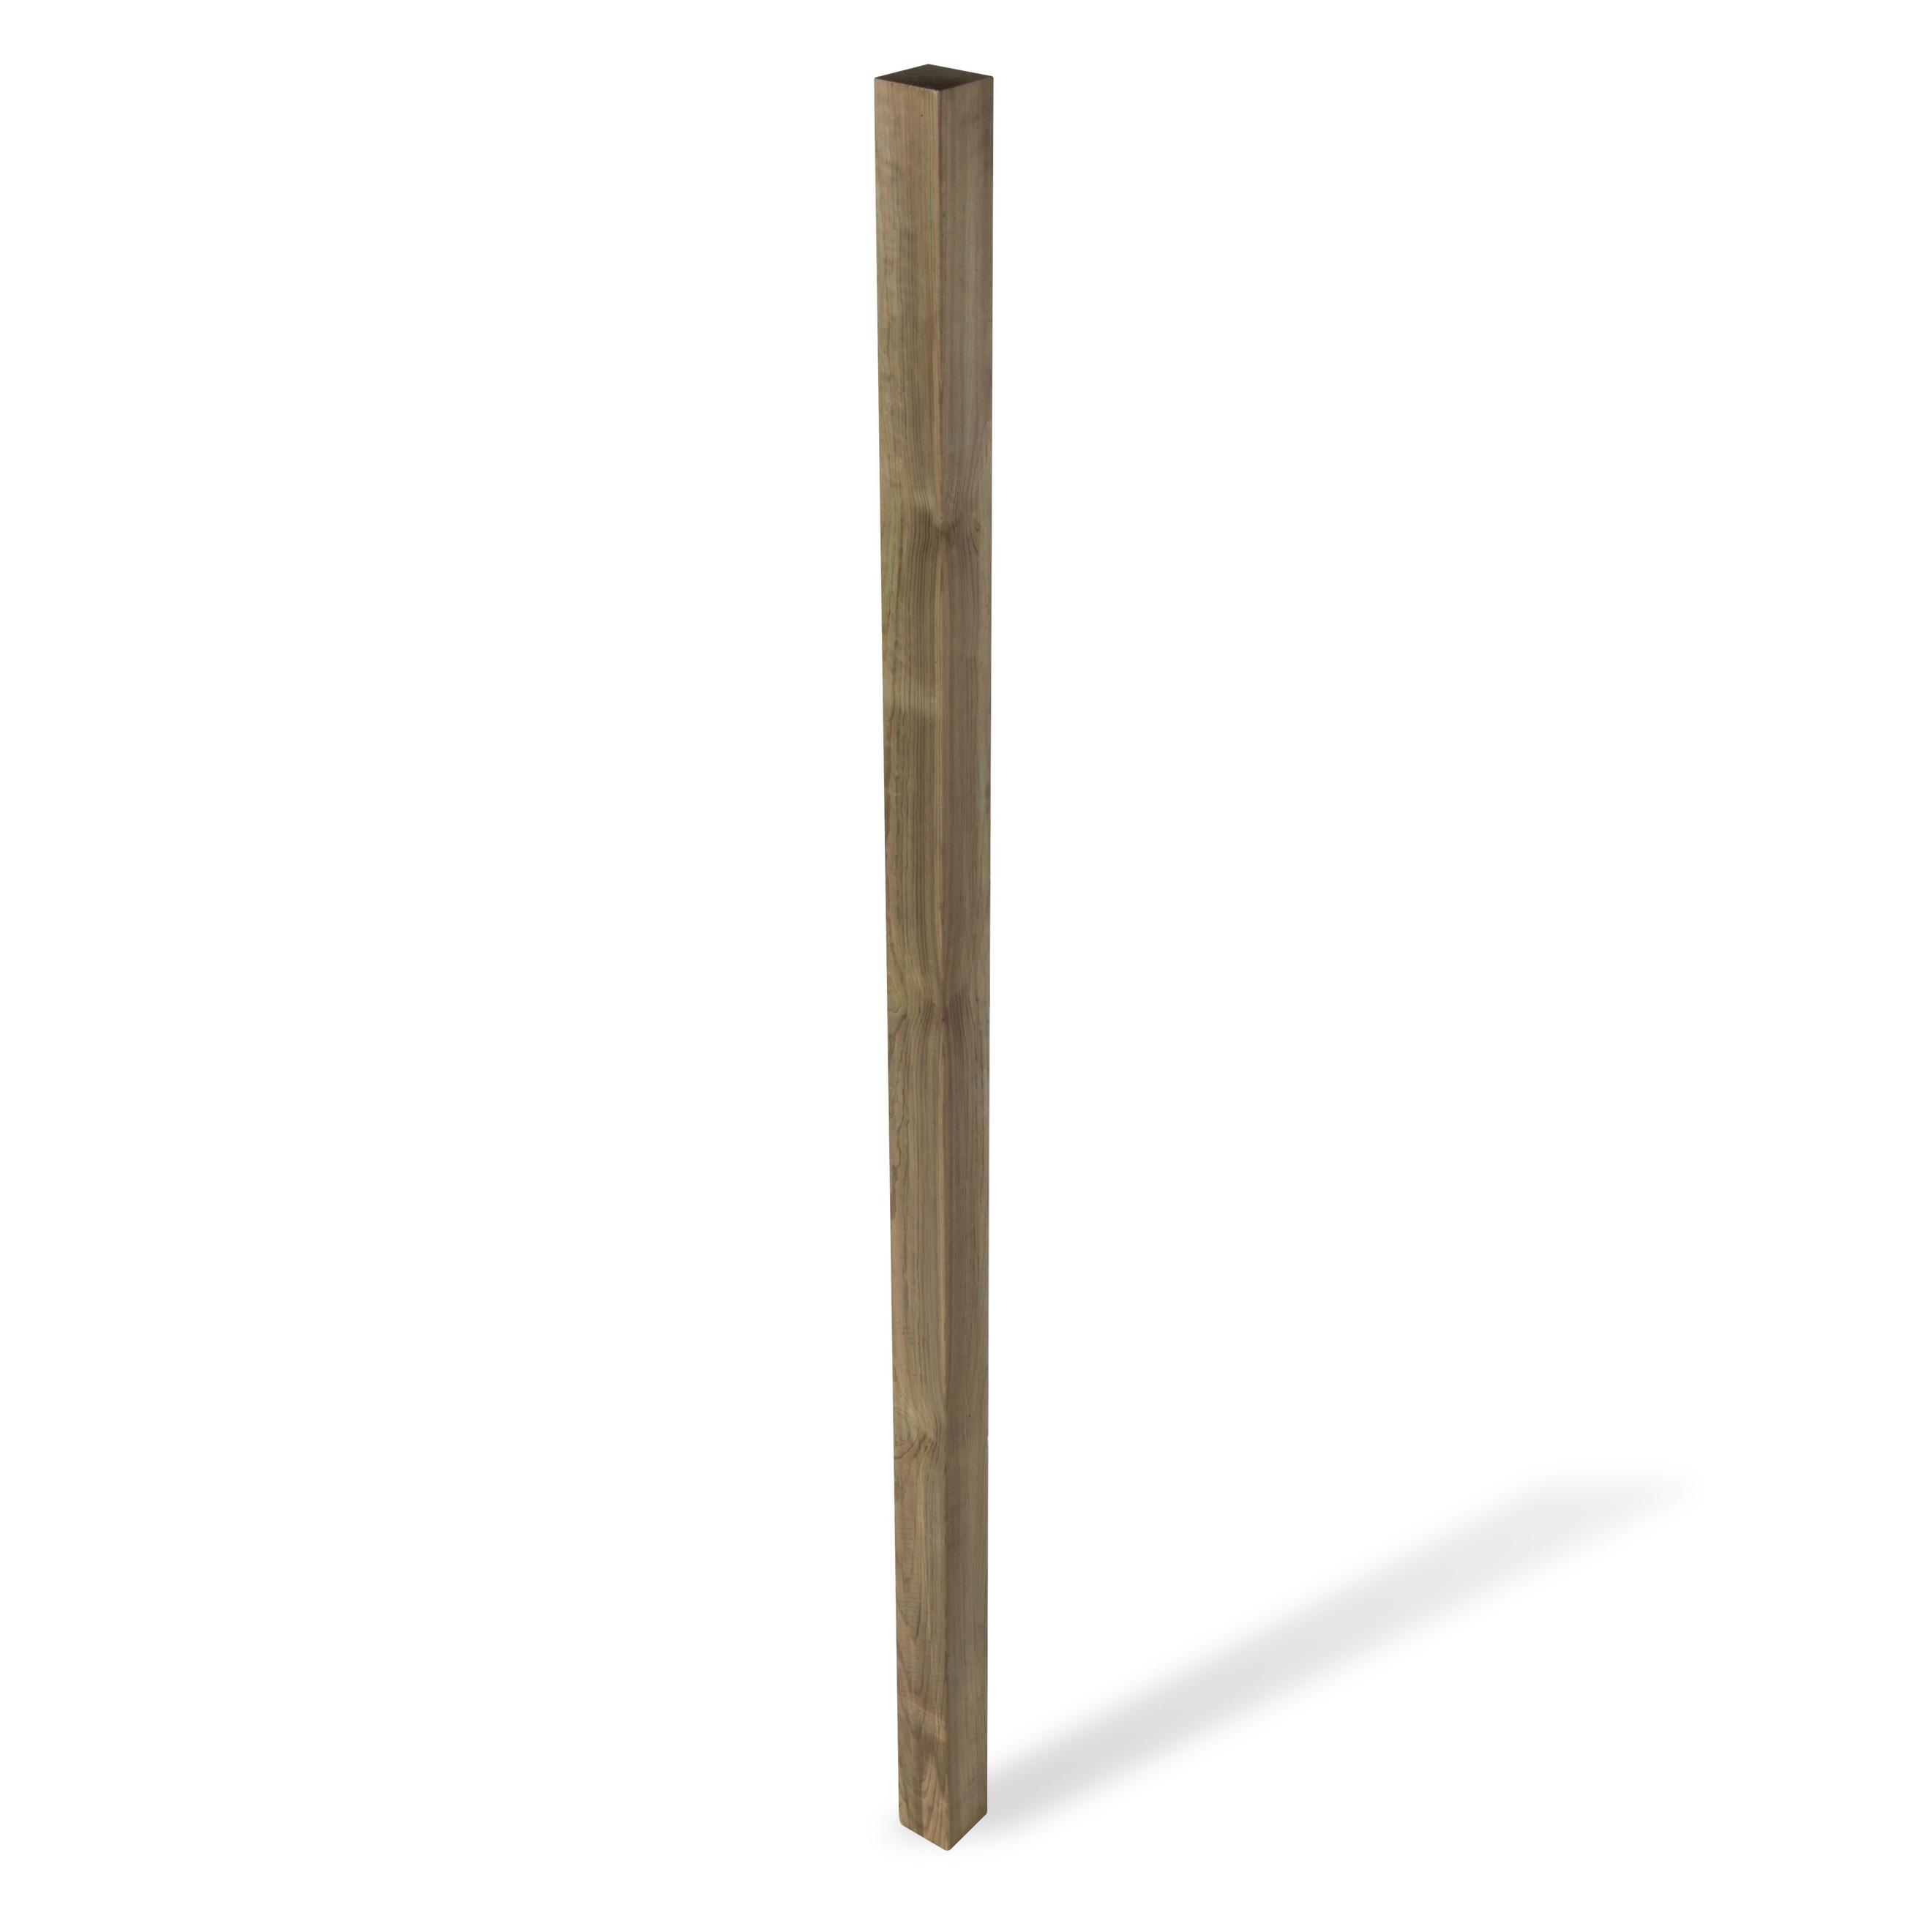 Klikstrom UC4 Natural Wooden Fence post (H)2.4m (W)90mm offers at £24 in B&Q